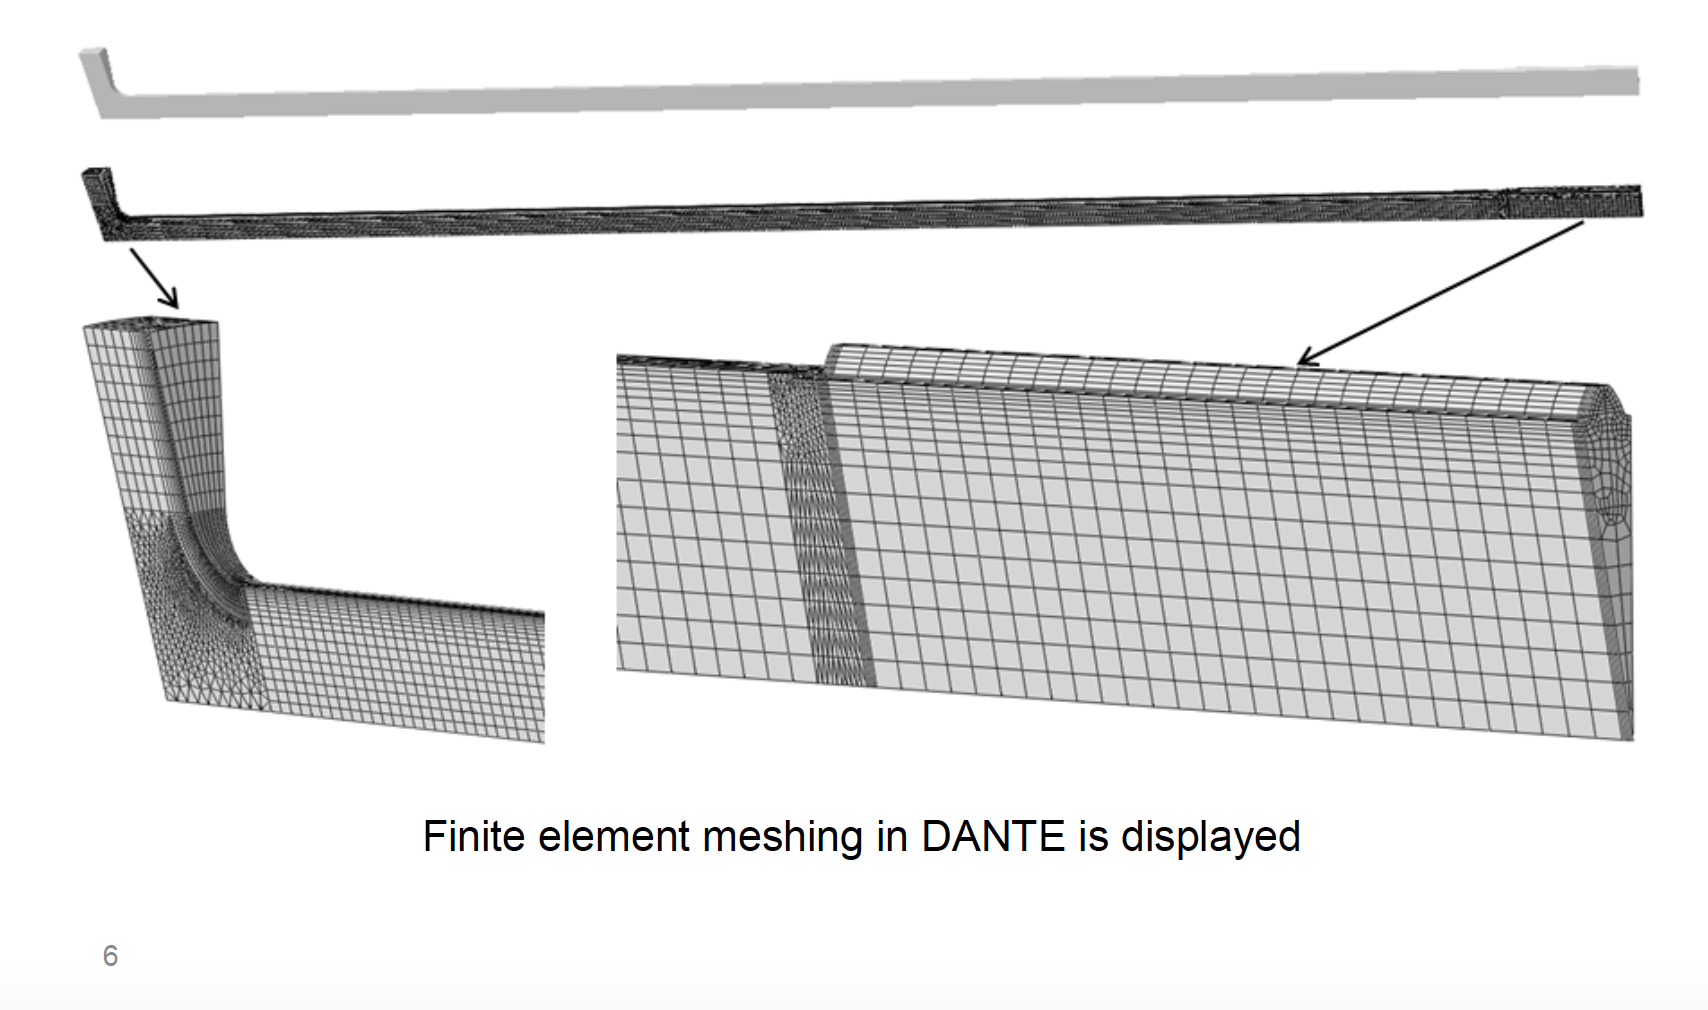 Fluxtrol | Integrated Computational Development of Induction Heat Treatment Process for Automotive Axle Shafts Figure 5 - Due to Symmetry, Single Tooth of Spline is Modeled in DANTE